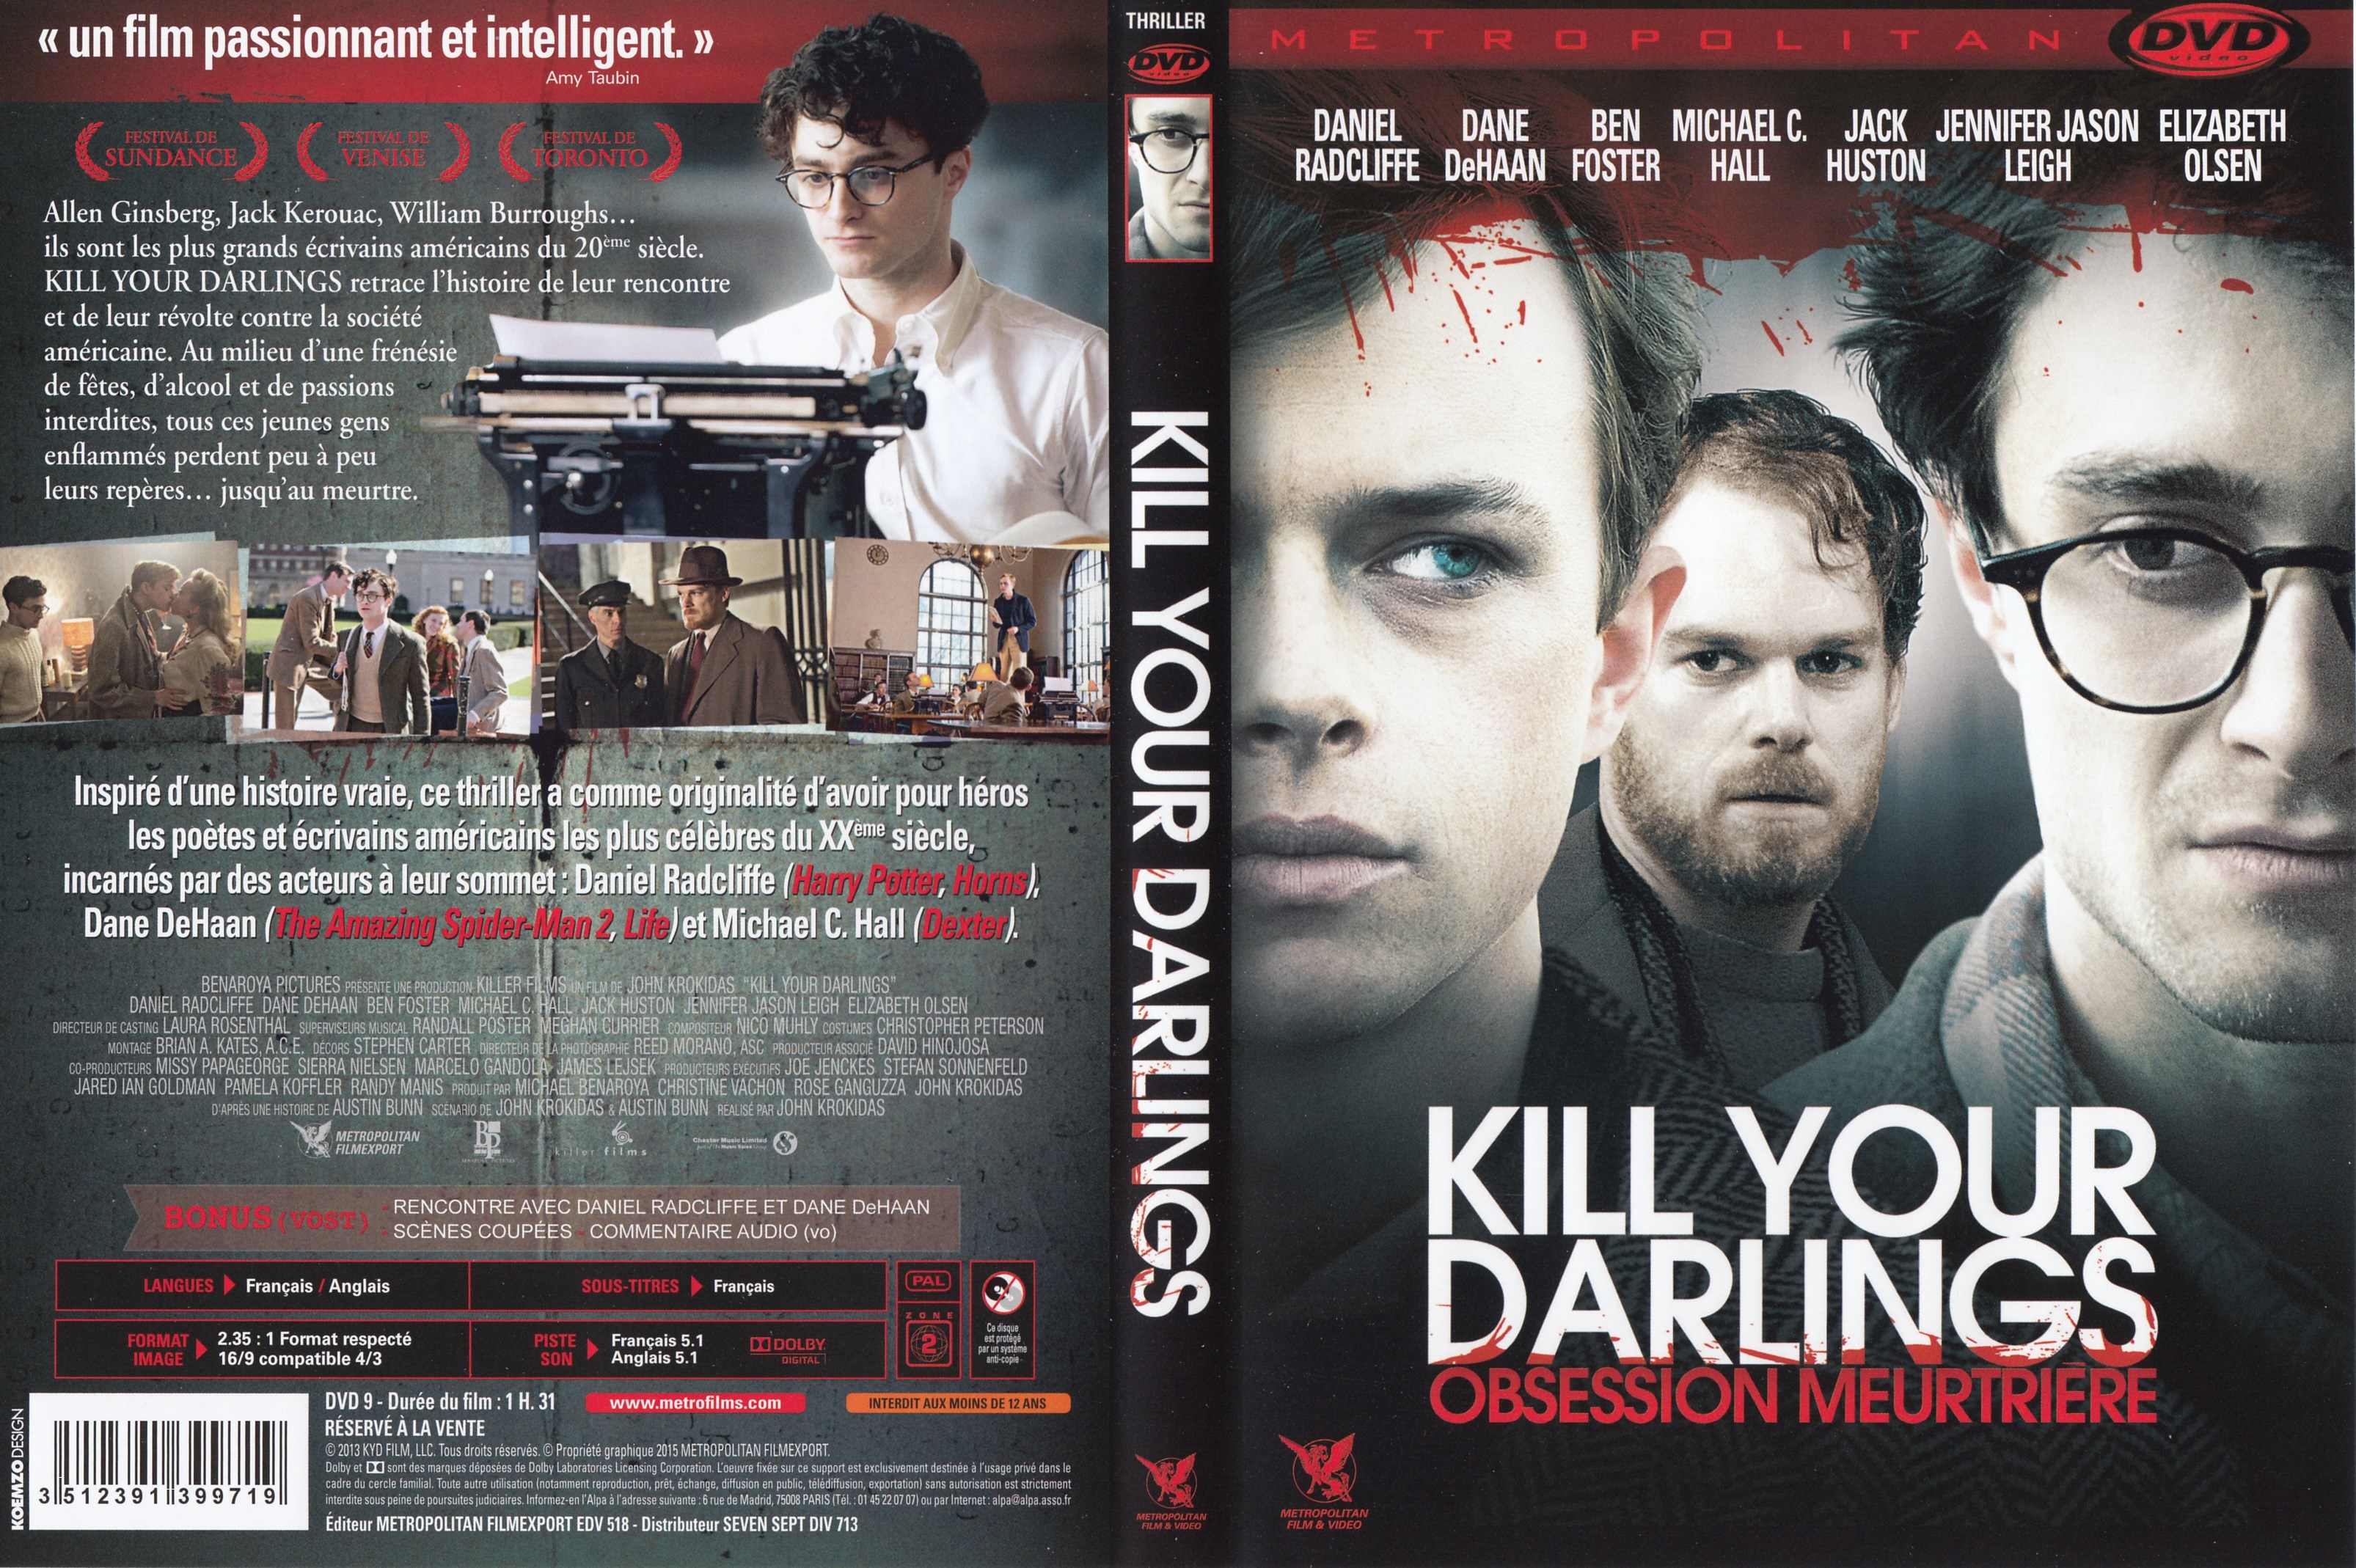 Jaquette DVD Kill Your Darlings Obsession meurtrire